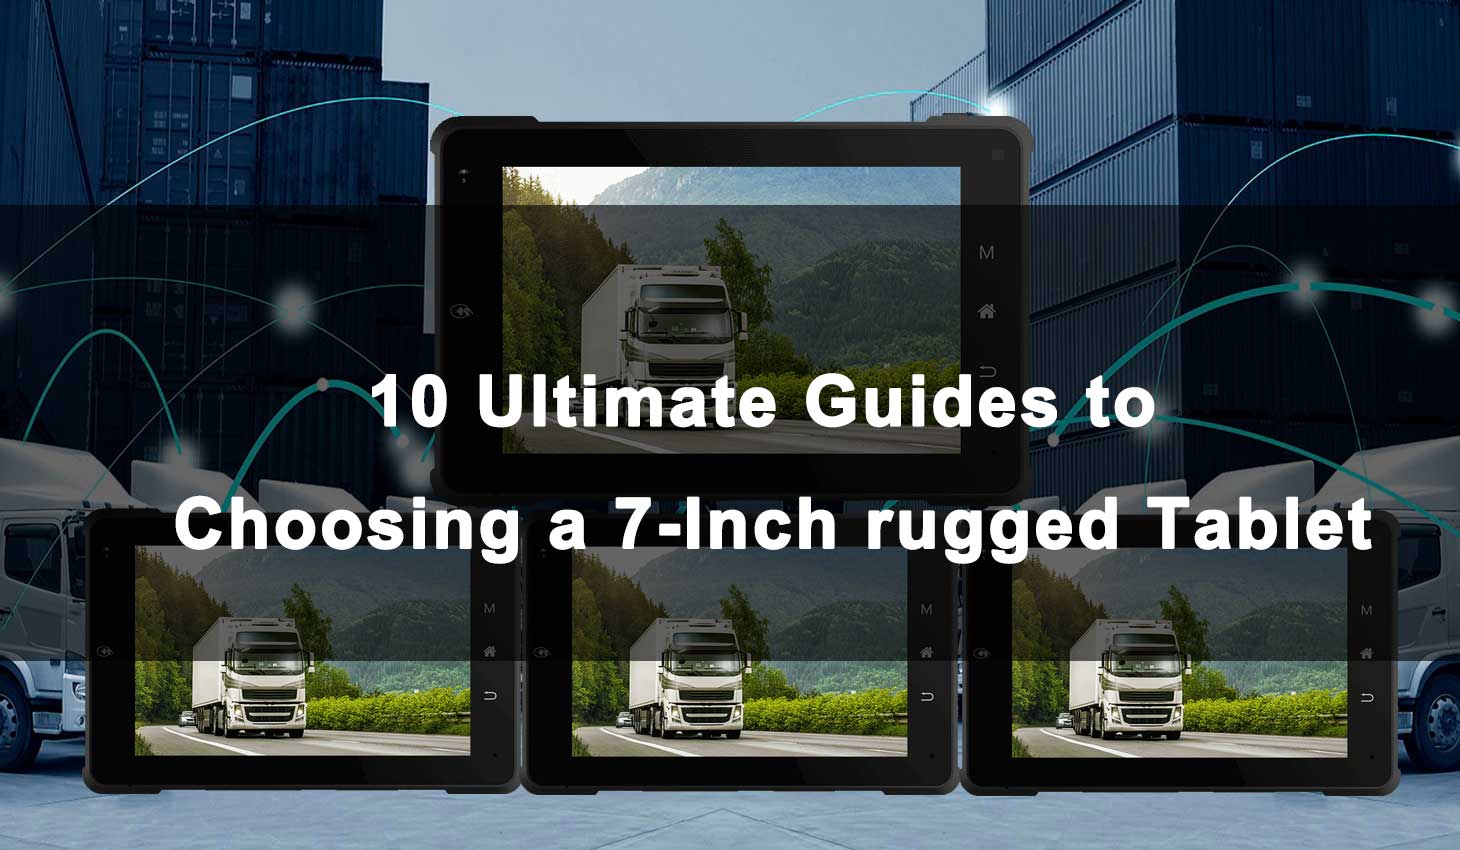 10 Ultimate Guides to Choosing a 7-Inch rugged Tablet